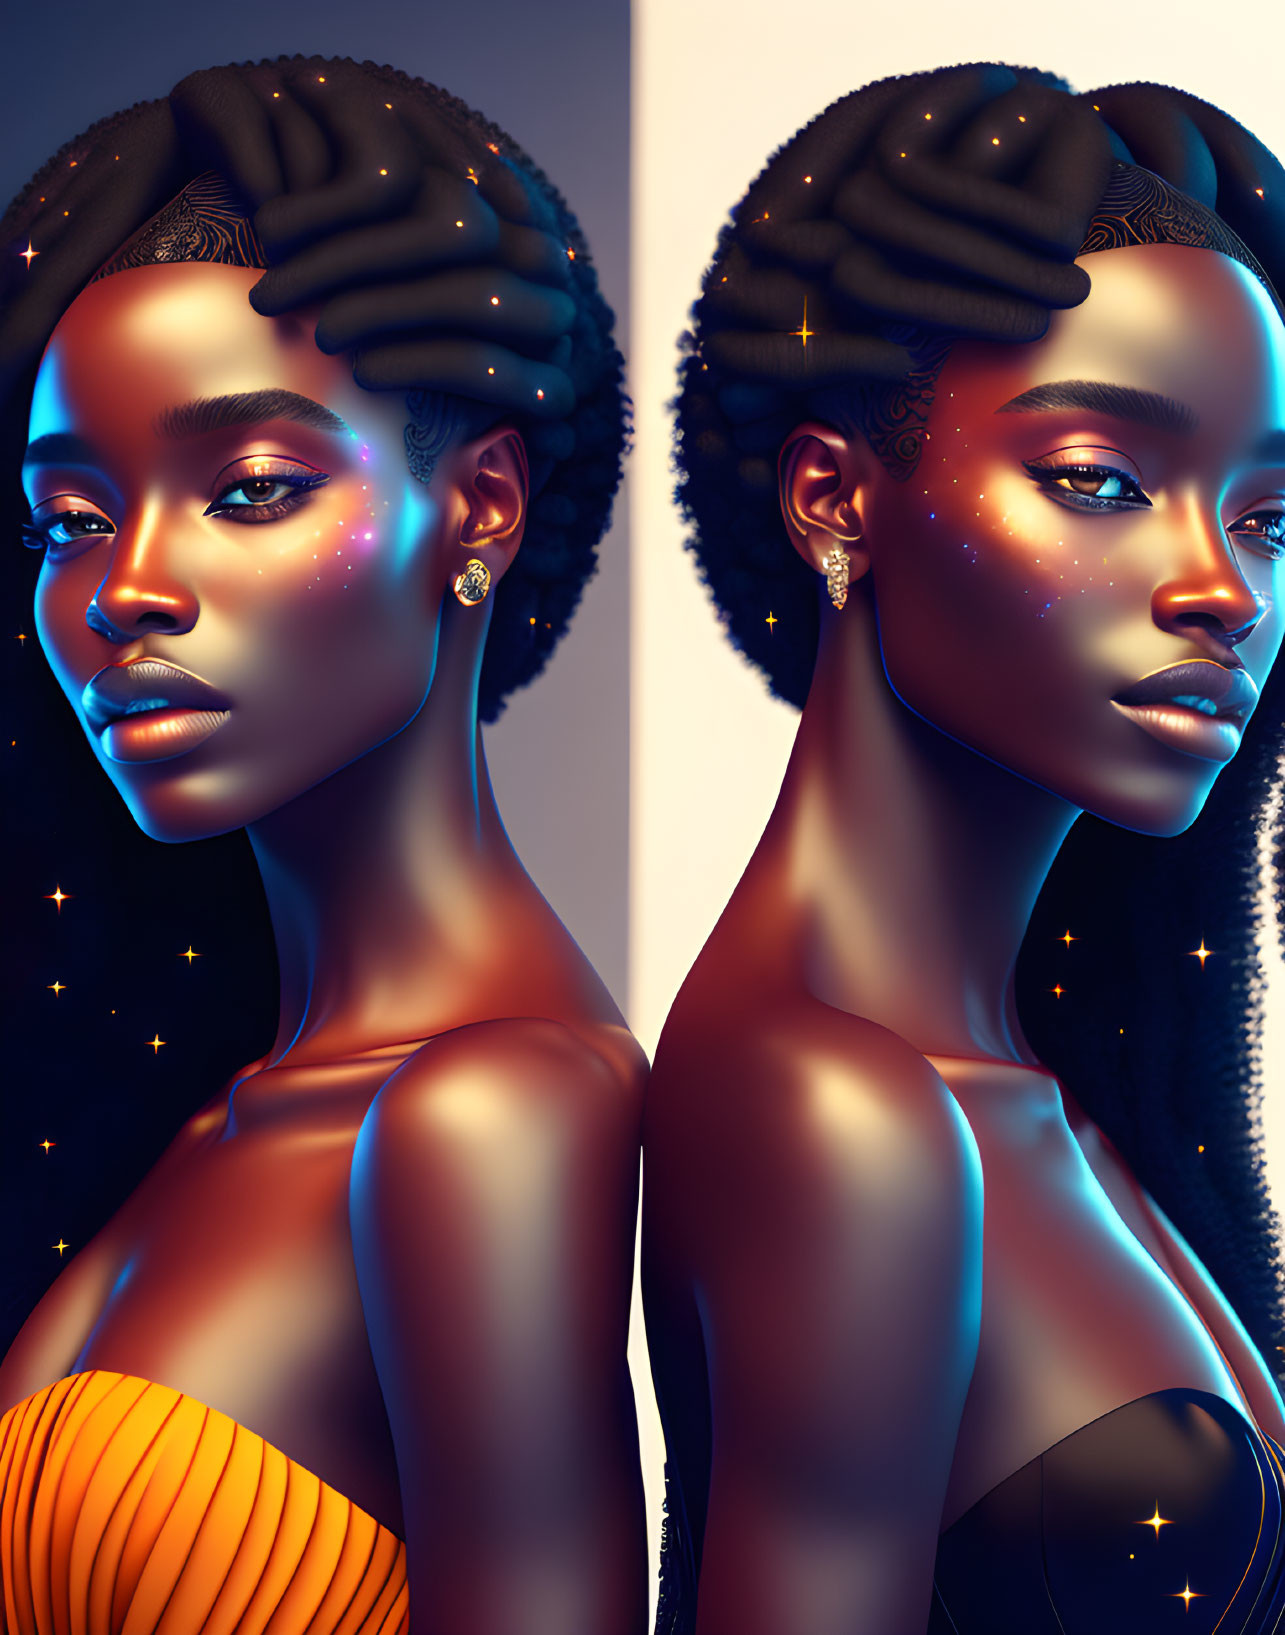 Symmetrical Artistic Depictions of Woman with Glowing Starry Makeup